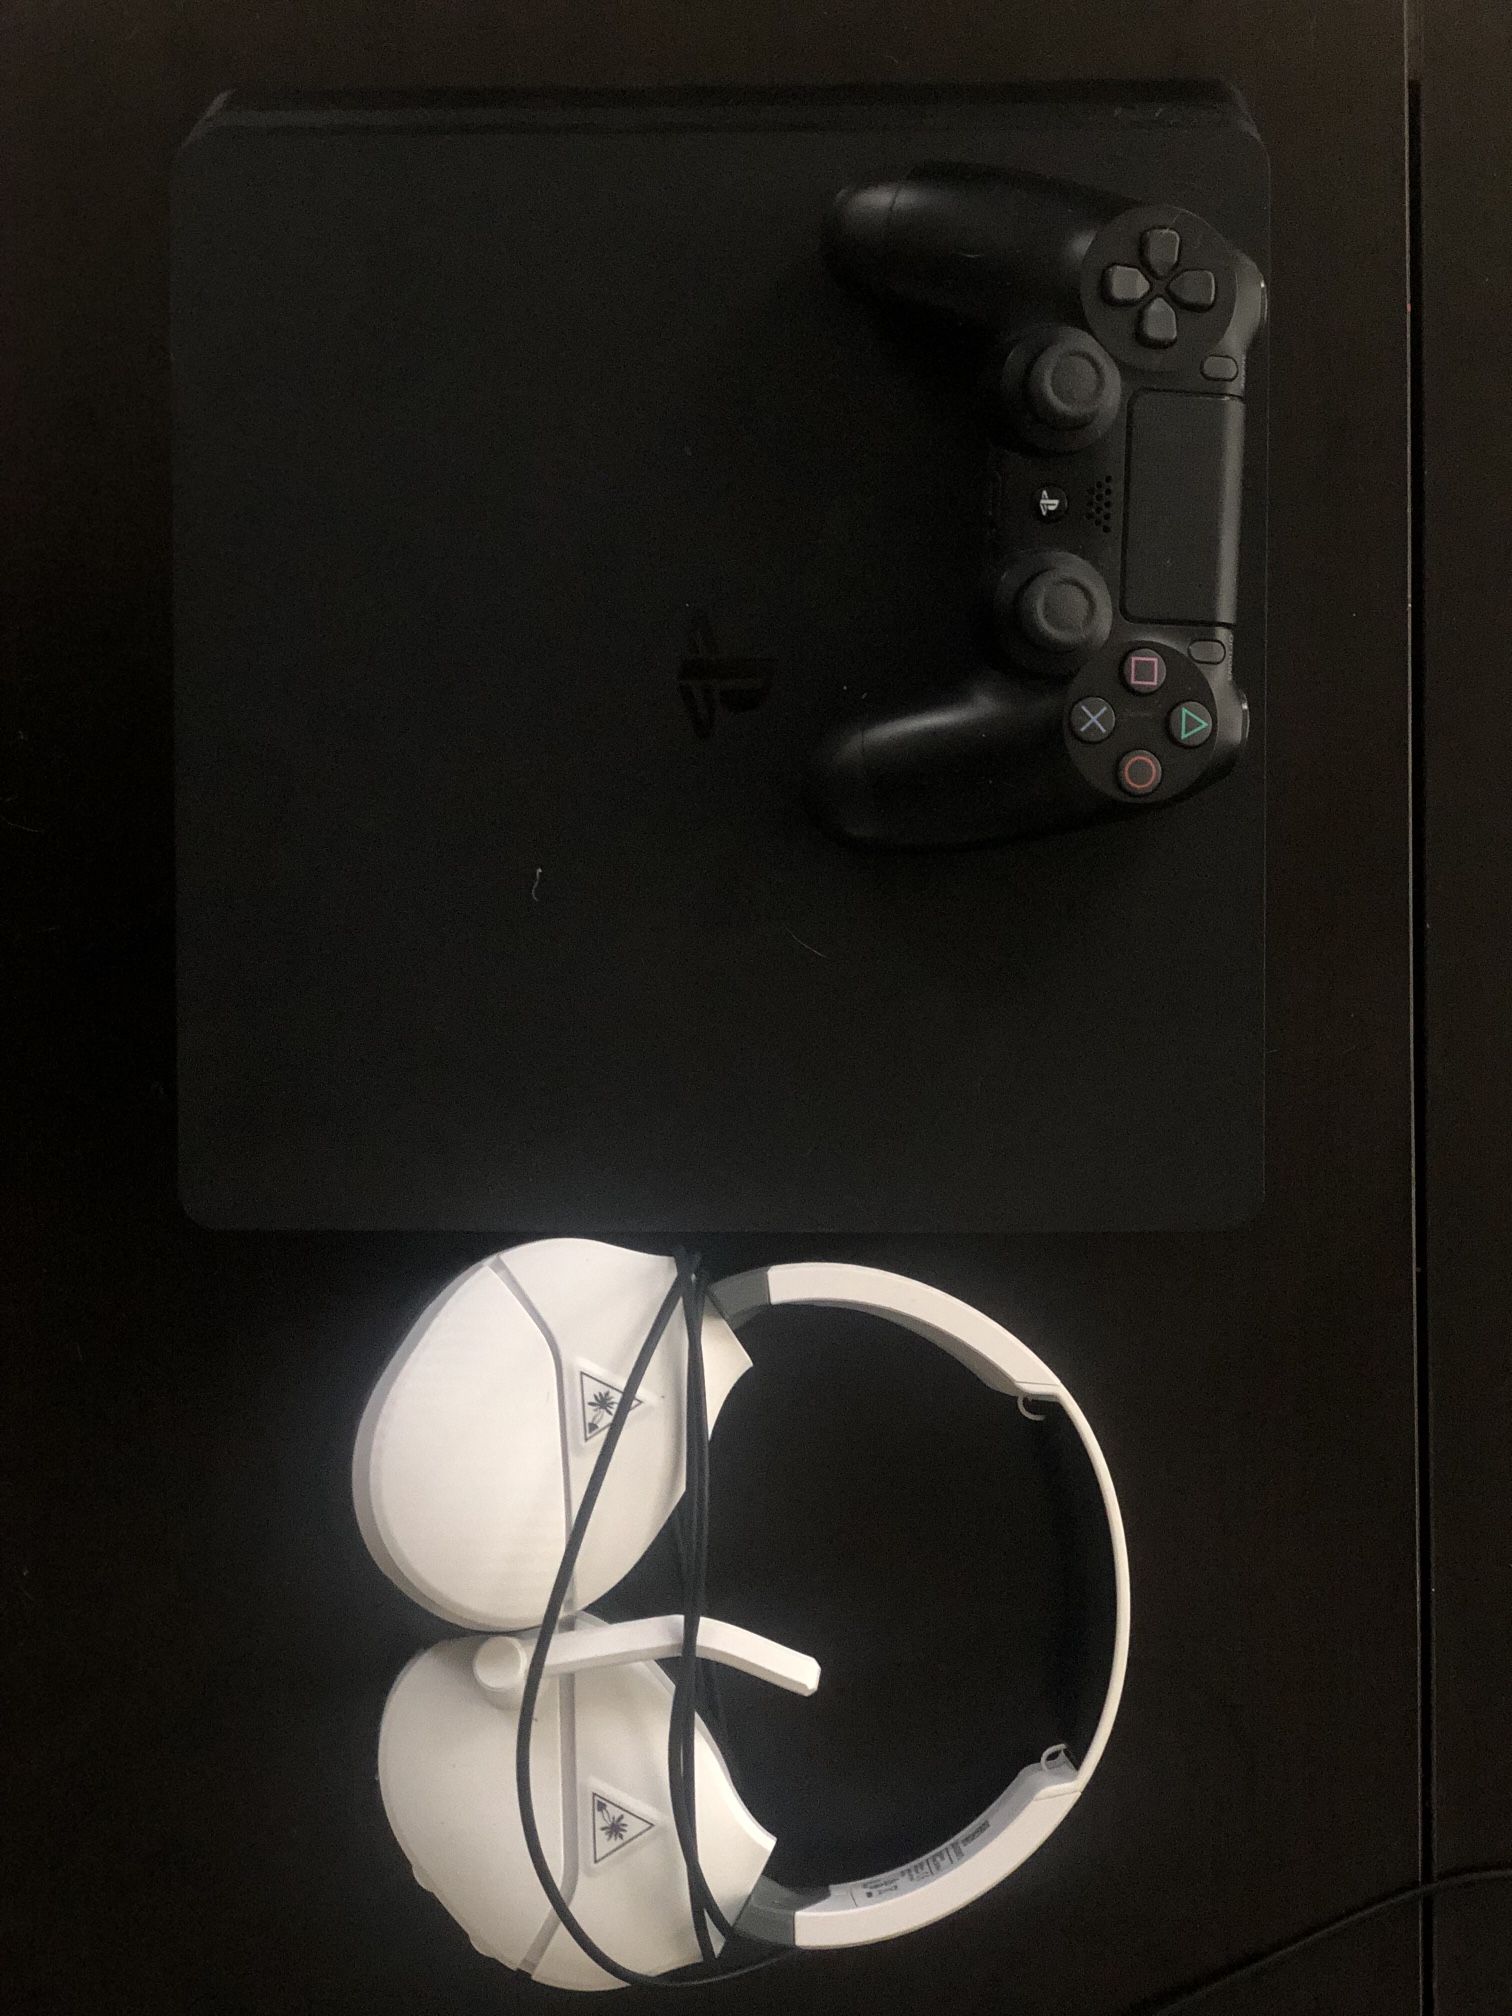 PS4 Slim w/controller, Turtle Beach Headset, And Four Games